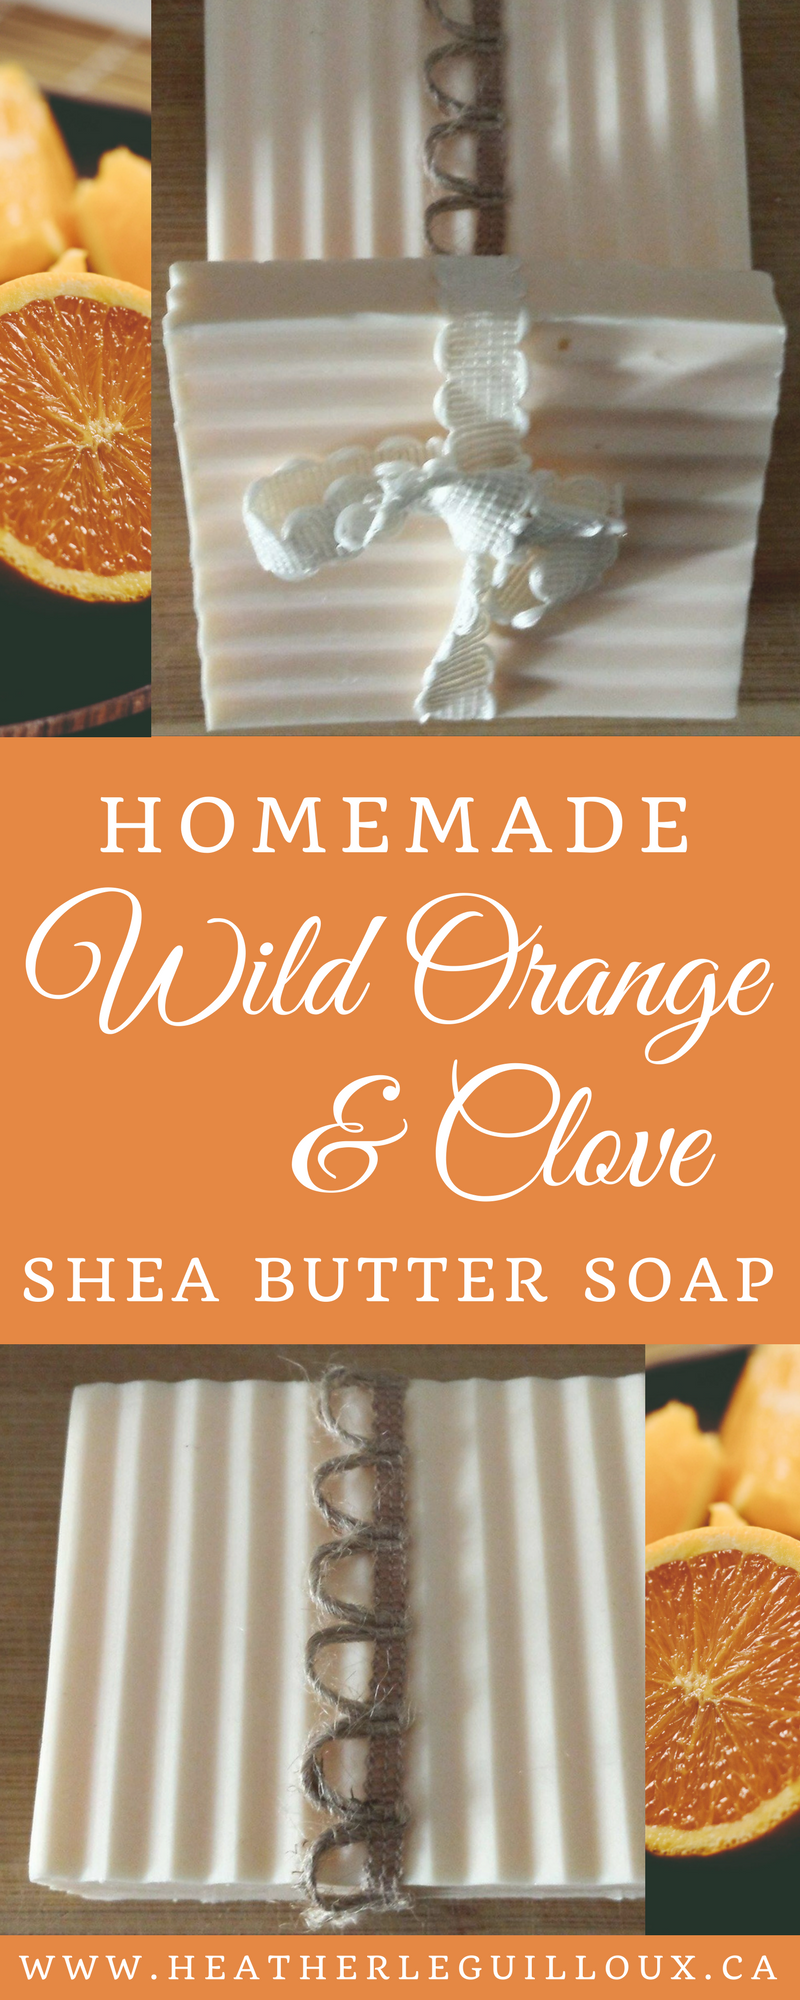 This post will outline how to create your own Wild Orange & Clove Shea Butter Soap made with doTERRA essential oils. This recipe is actually surprisingly simple to create and can also make a great gift for fall or winter holidays. The smell reminds me of a crisp autumn day, watching the leaves fall while sipping on a hot apple cider. #essentialoils #orange #soap